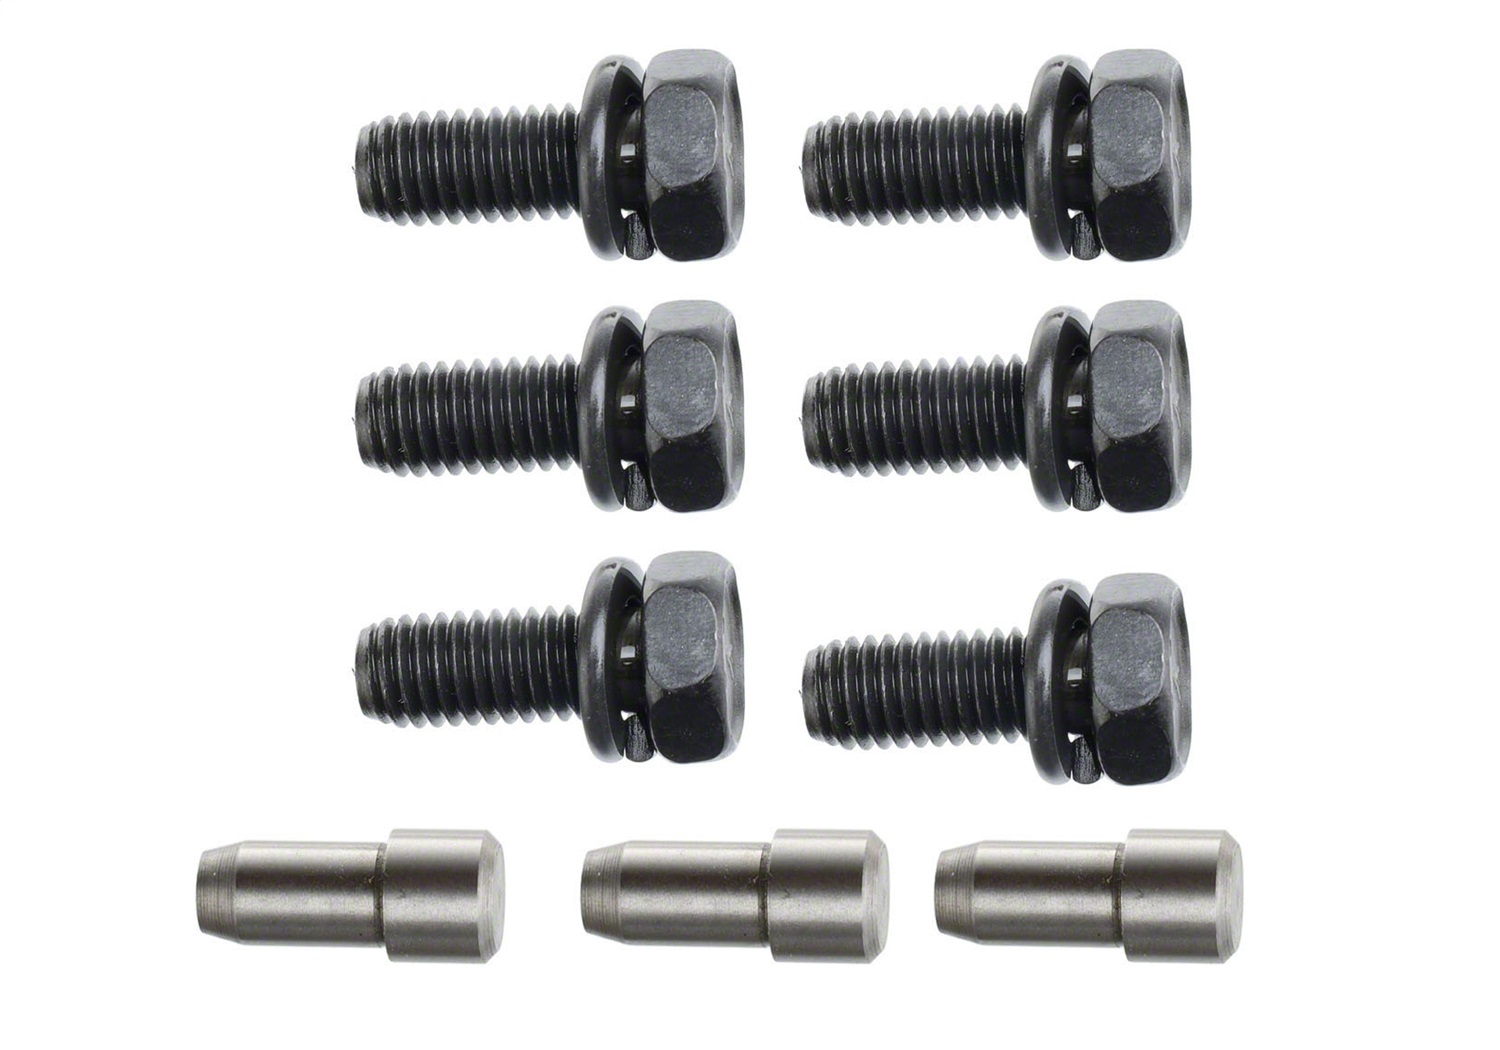 Ford Racing Ford Racing M-6397-A302 Pressure Plate Bolt/Dowel Kit